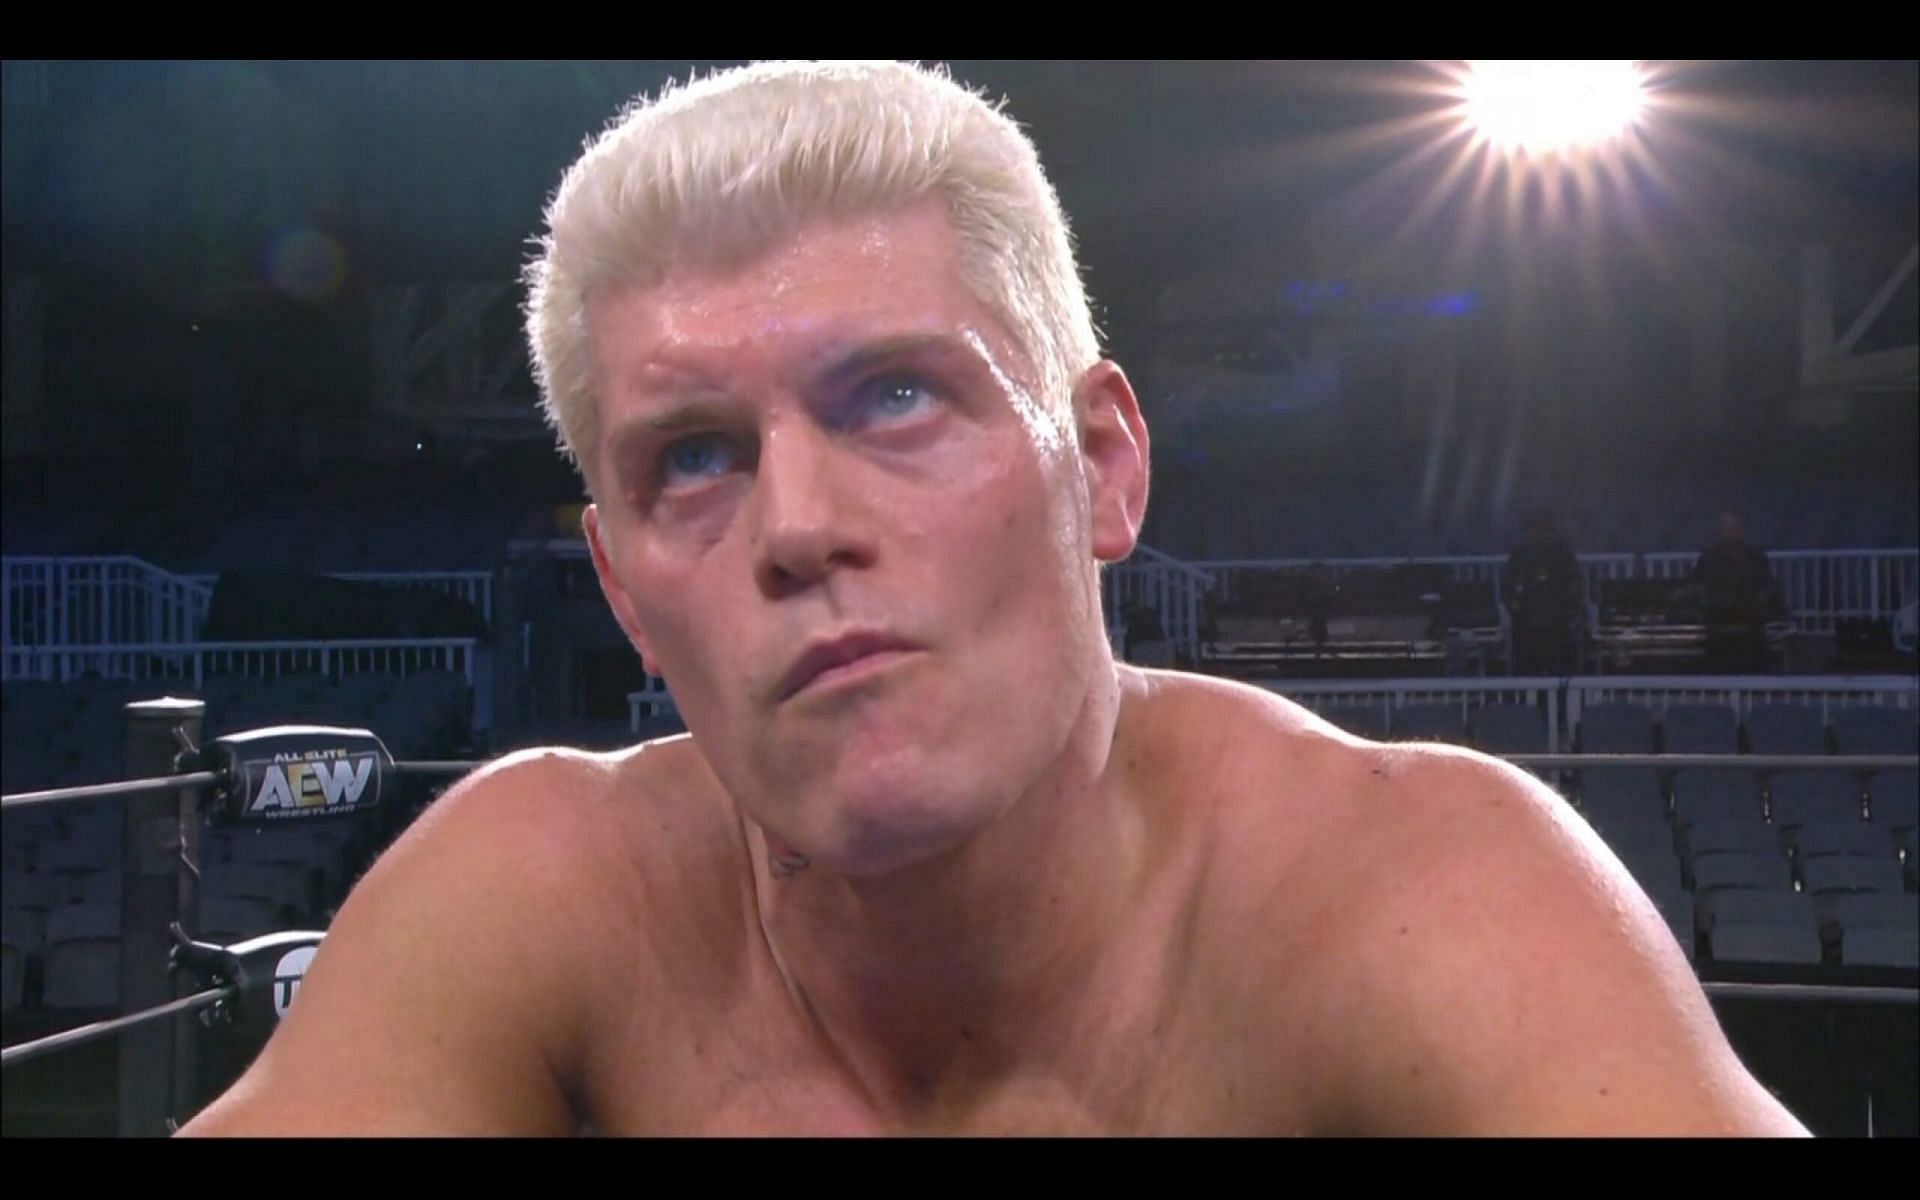 Rhodes experienced boos shortly before leaving AEW